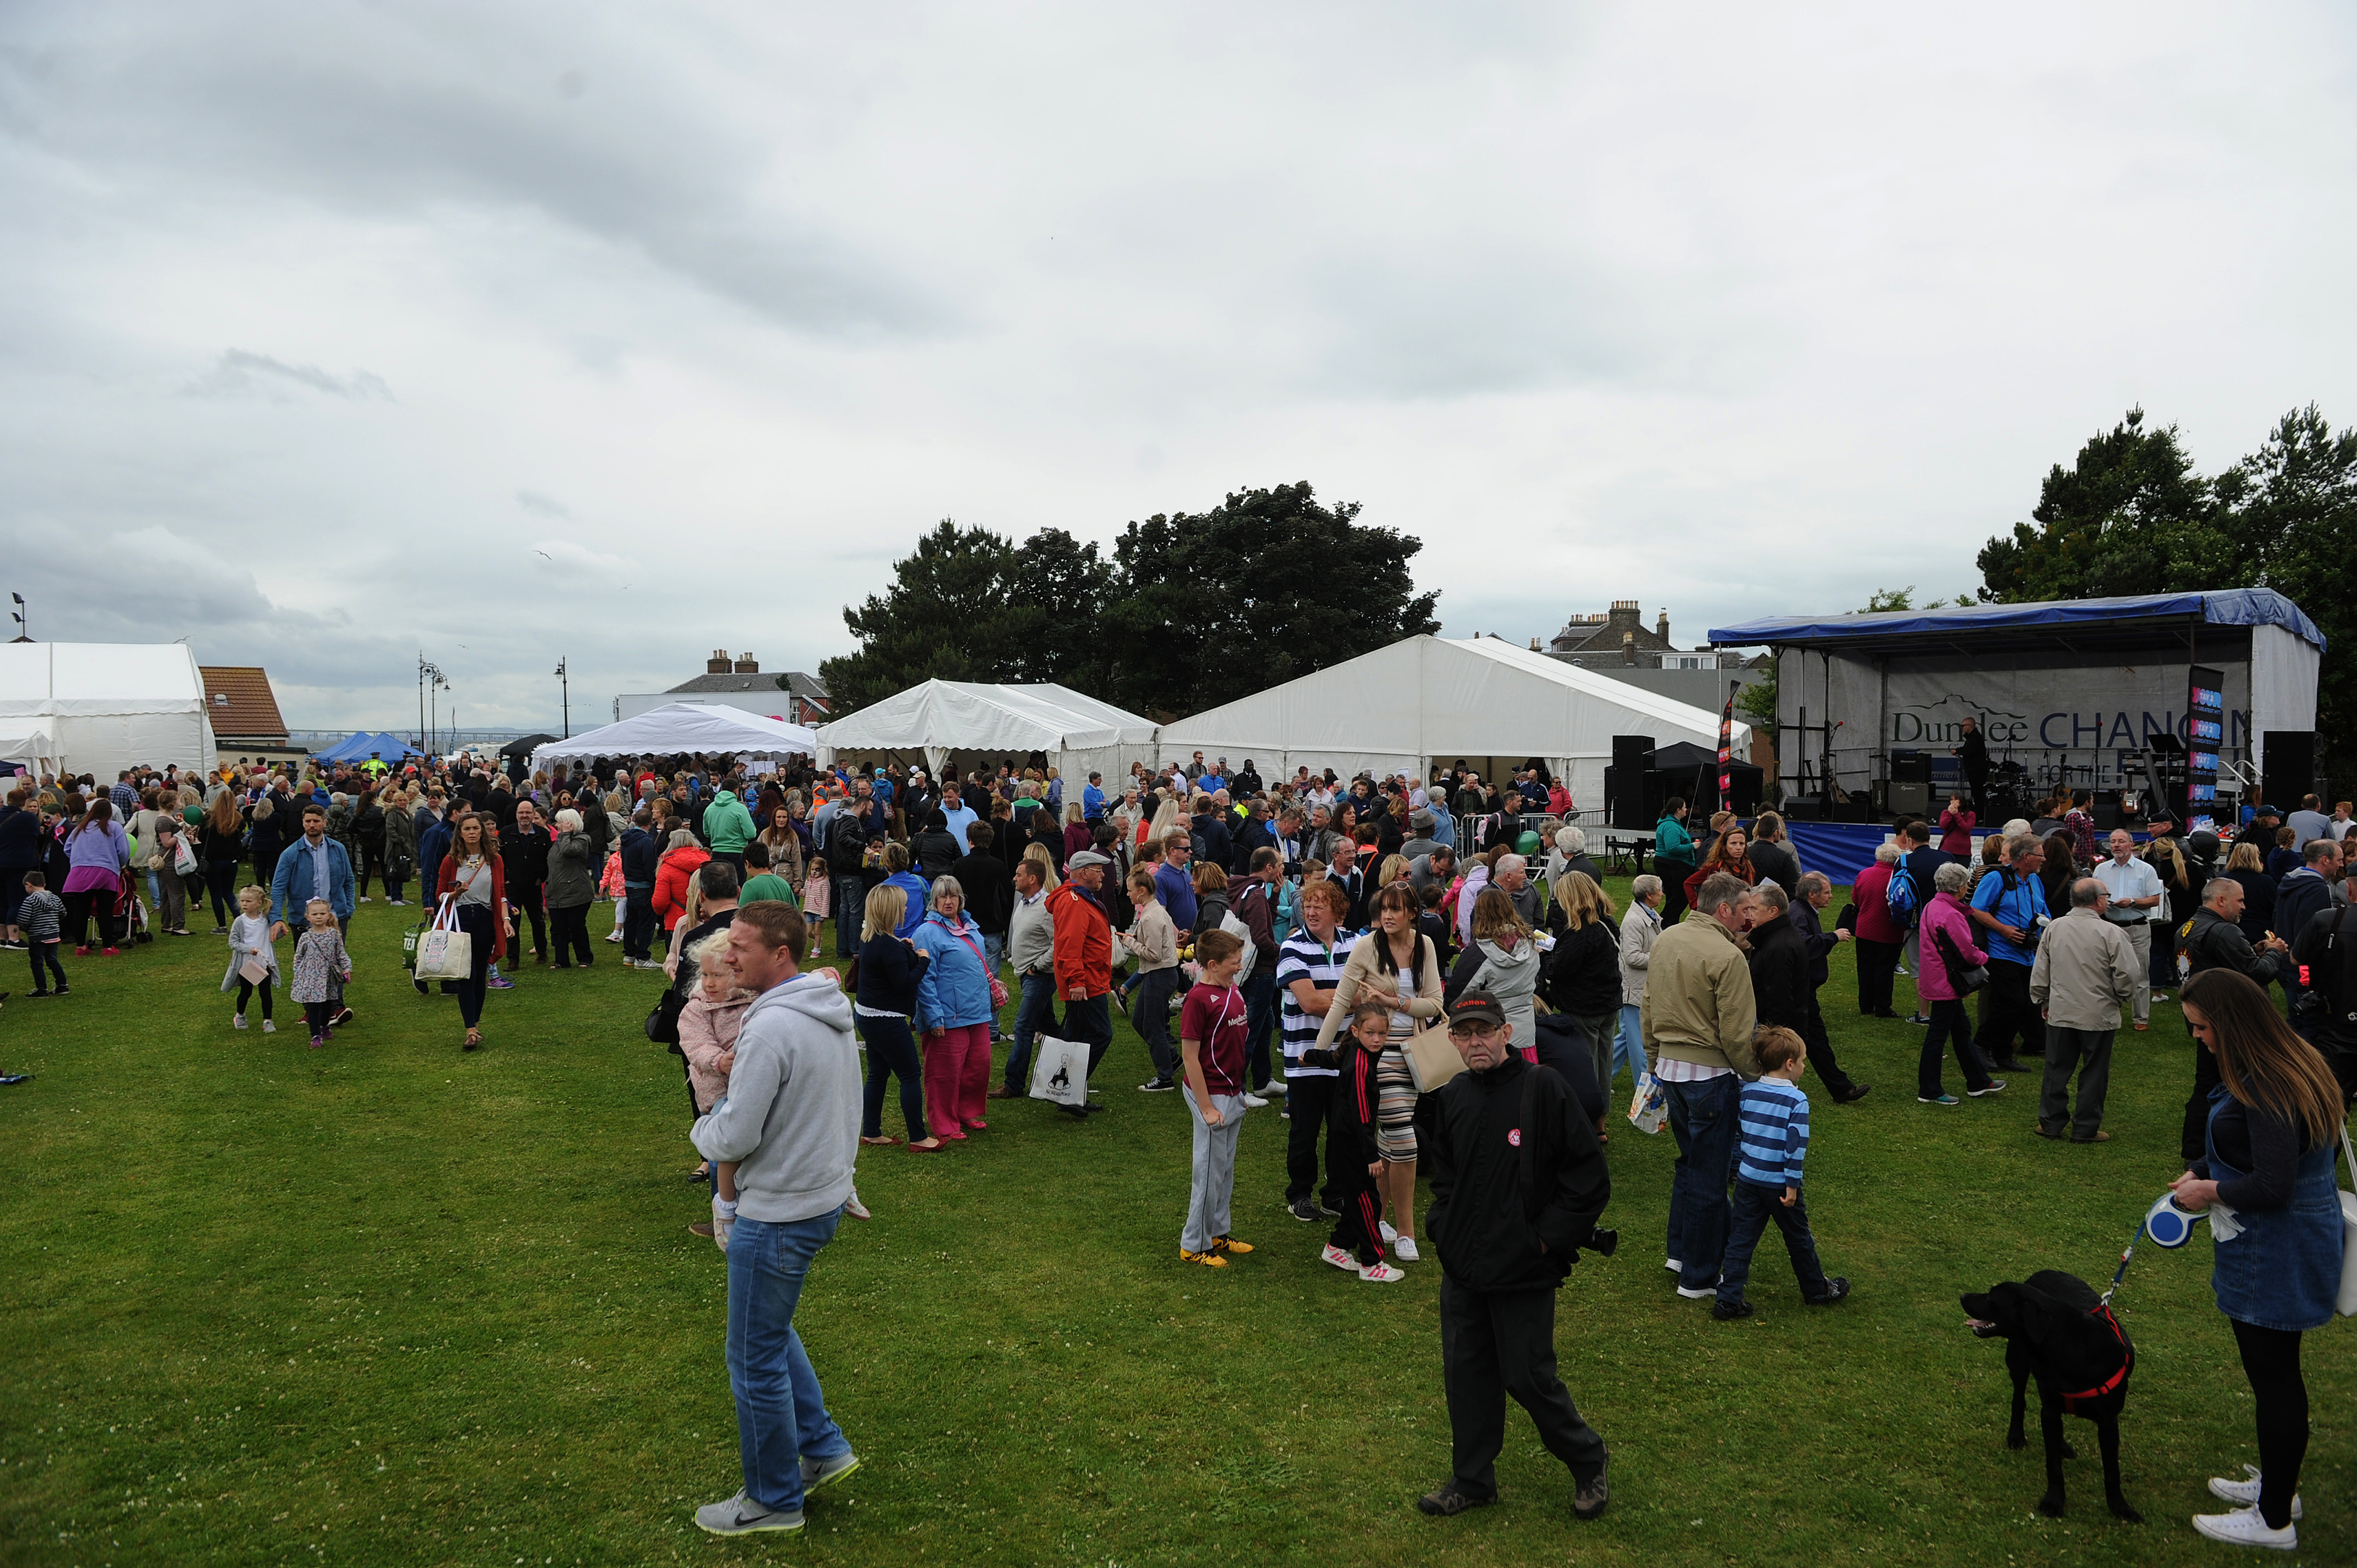 The Broughty Ferry Gala launched with the annual fete on Sunday